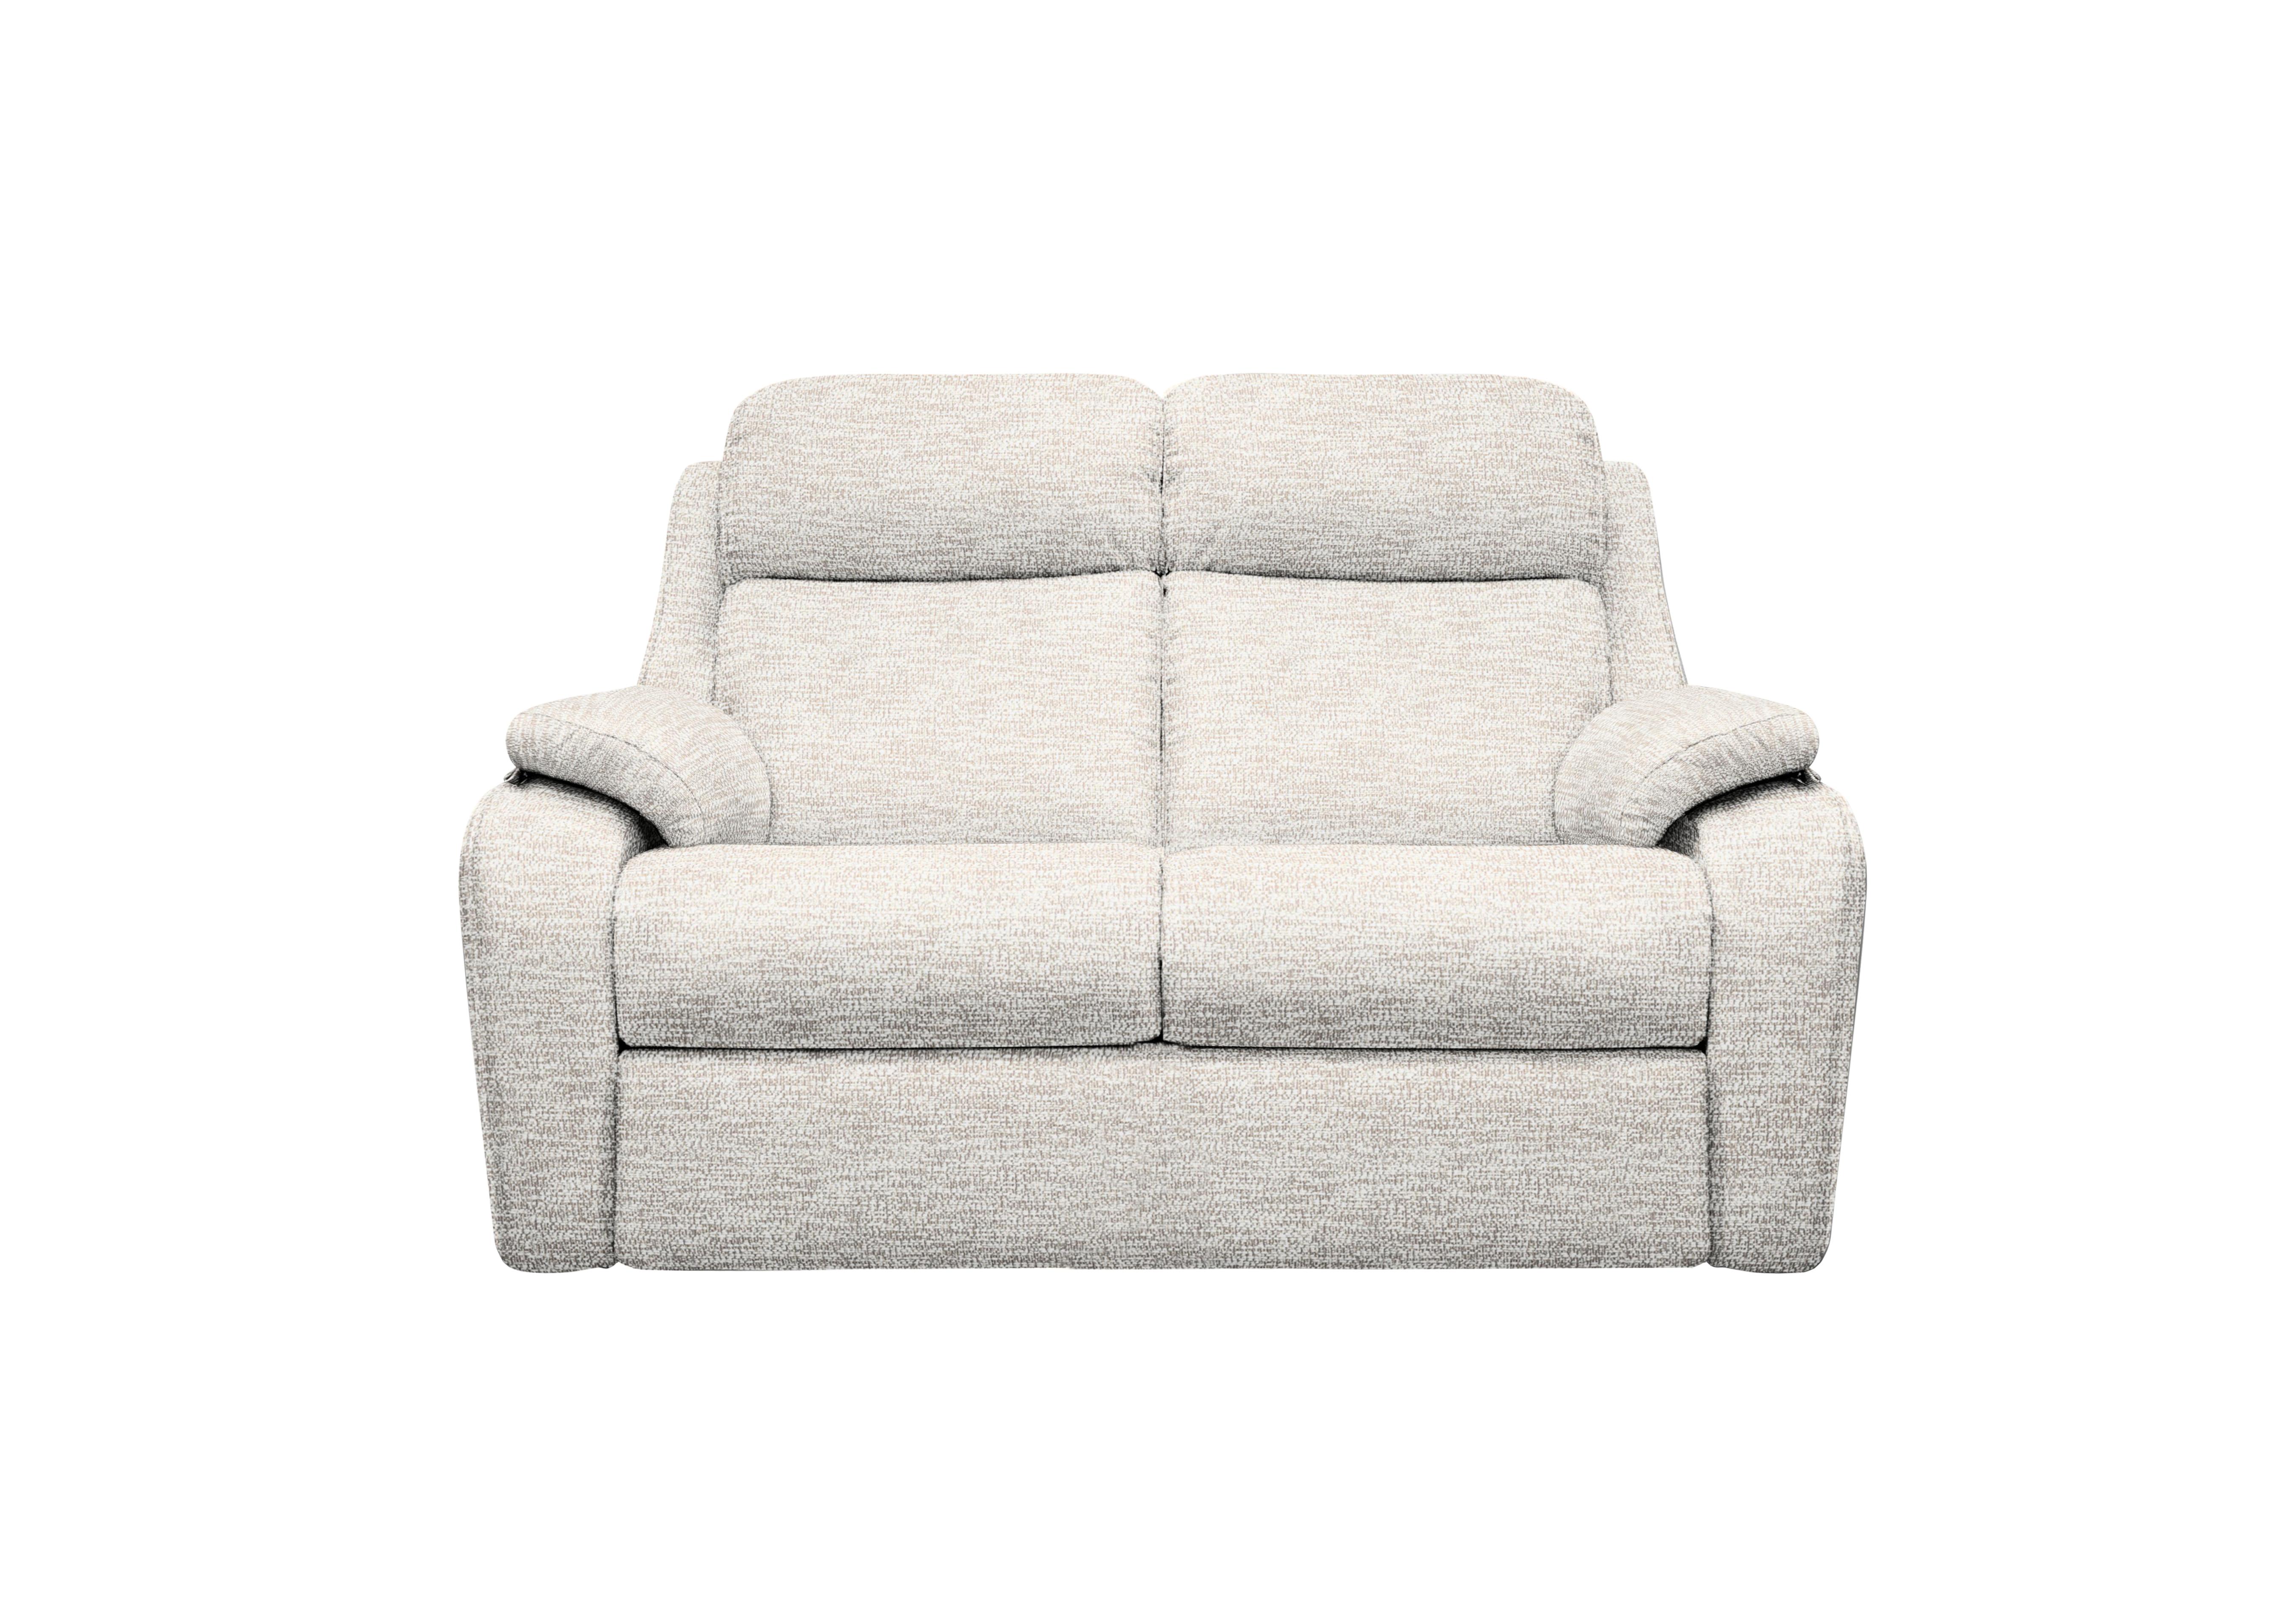 Kingsbury 2 Seater Fabric Power Recliner Sofa with Power Headrests in C931 Rush Cream on Furniture Village